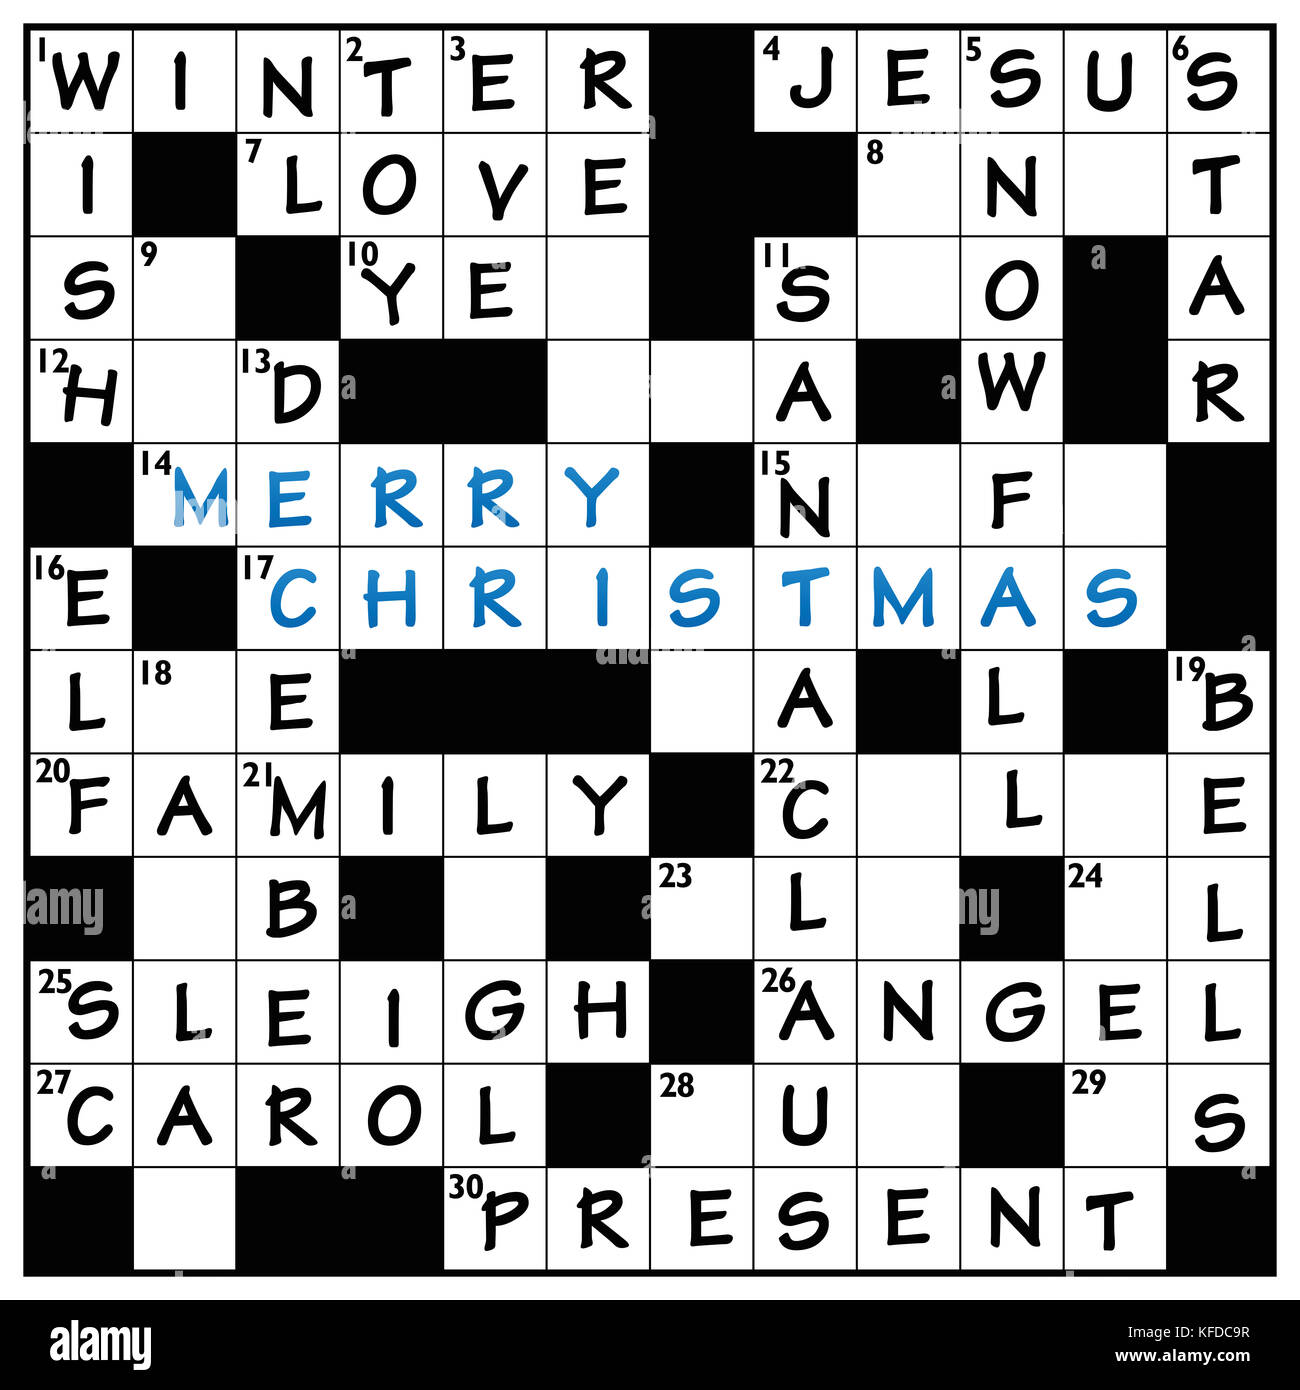 Christmas crossword cloud puzzle with typical words like winter, sleigh, angel, snowfall, Santa Claus and MERRY CHRISTMAS in the middle. Stock Photo